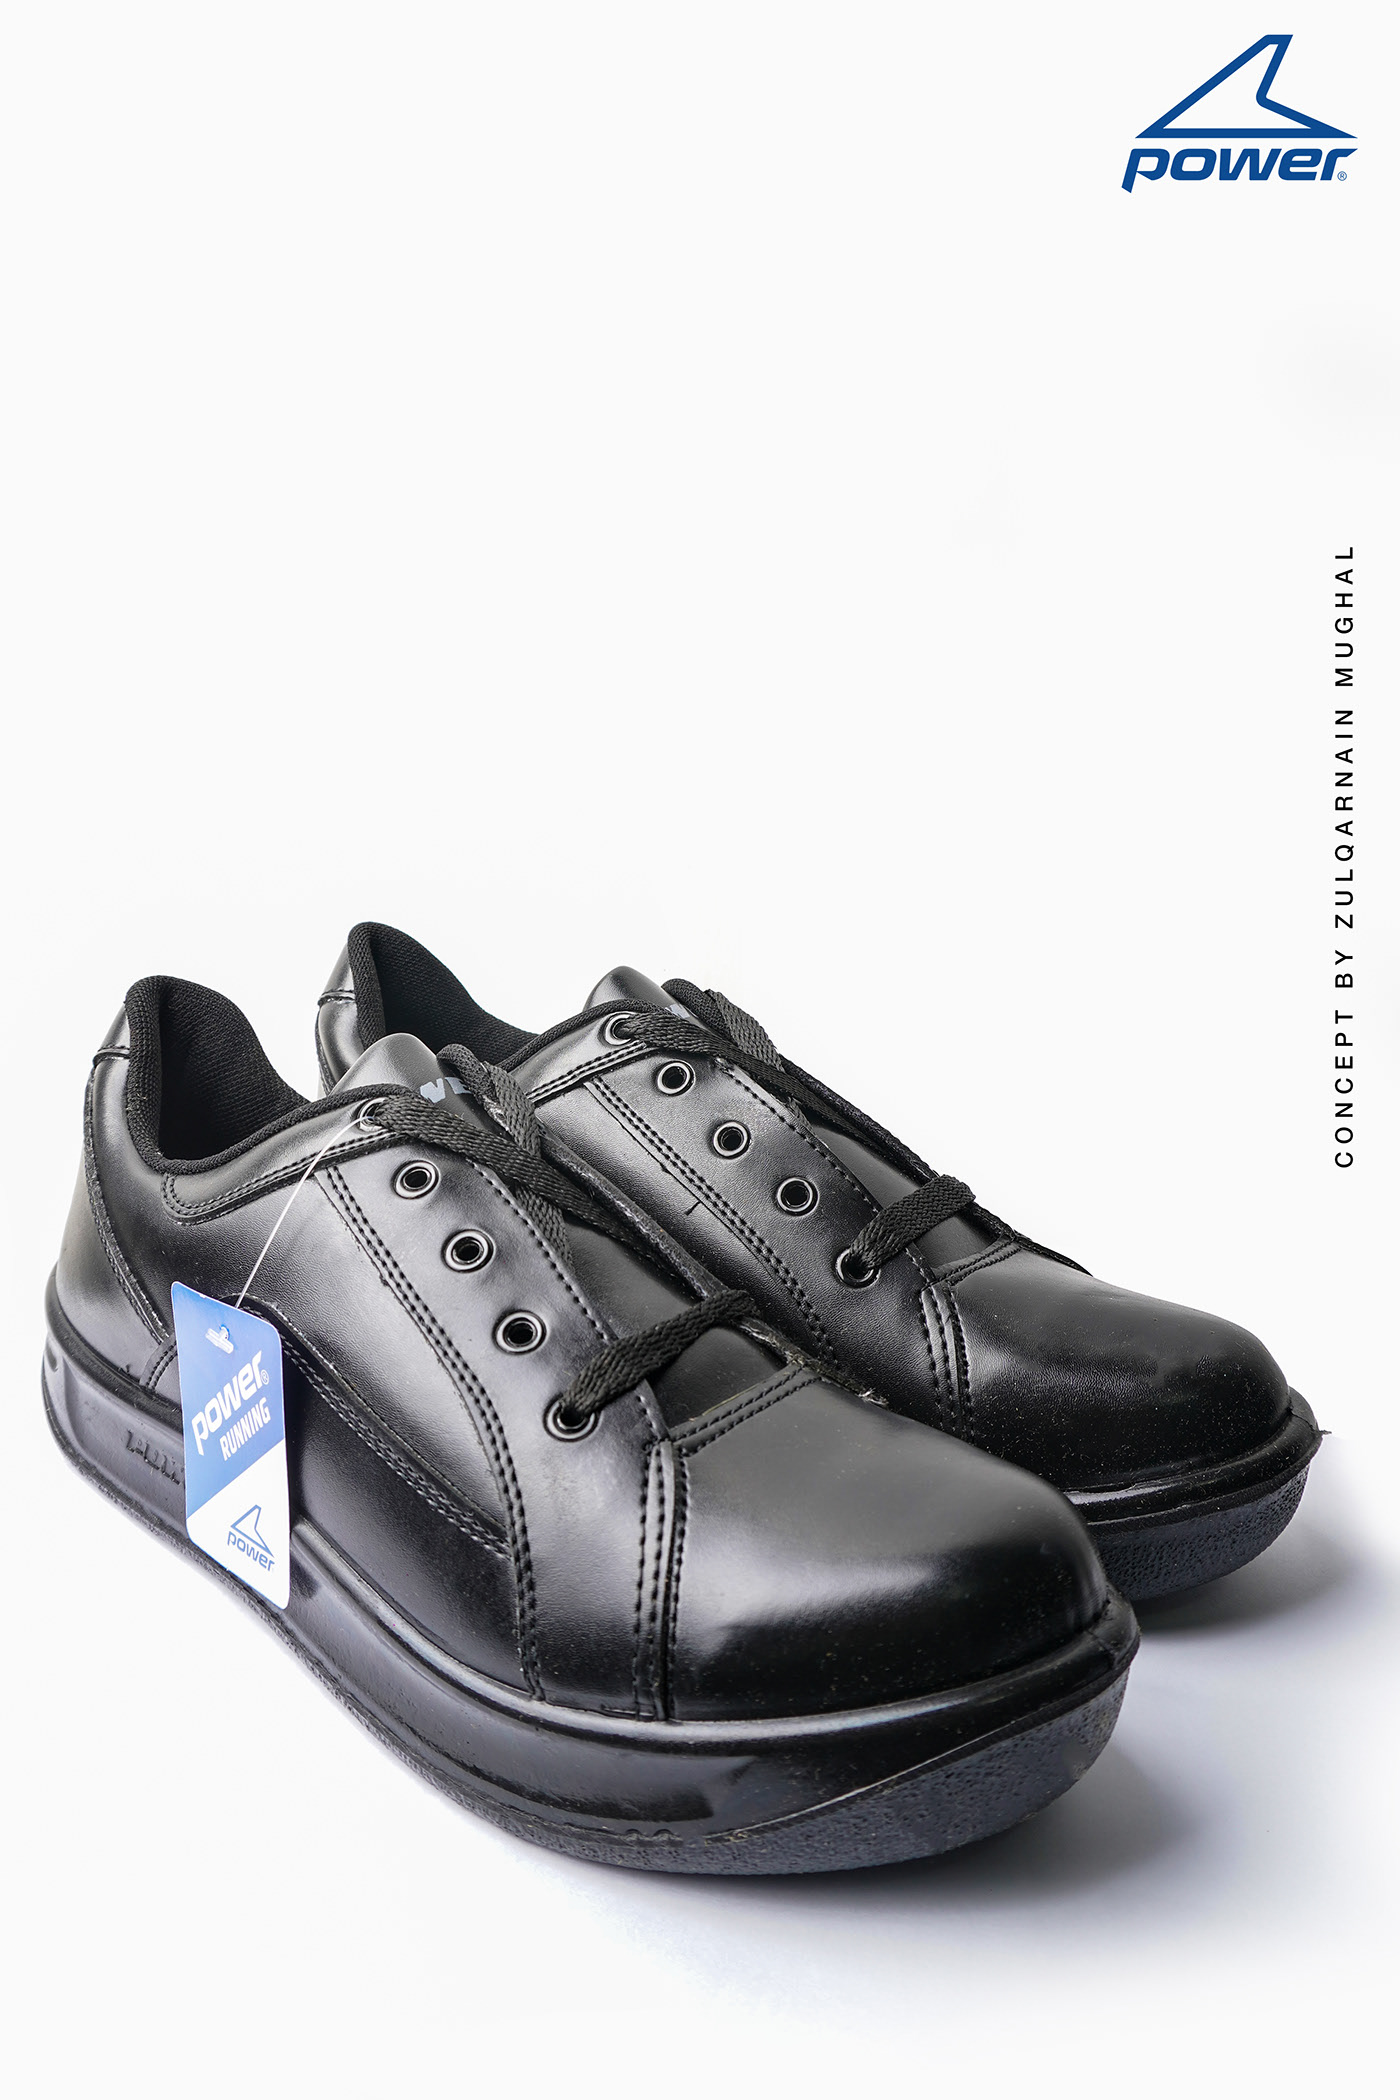 Power Shoes - Product Photography - adrotize 05